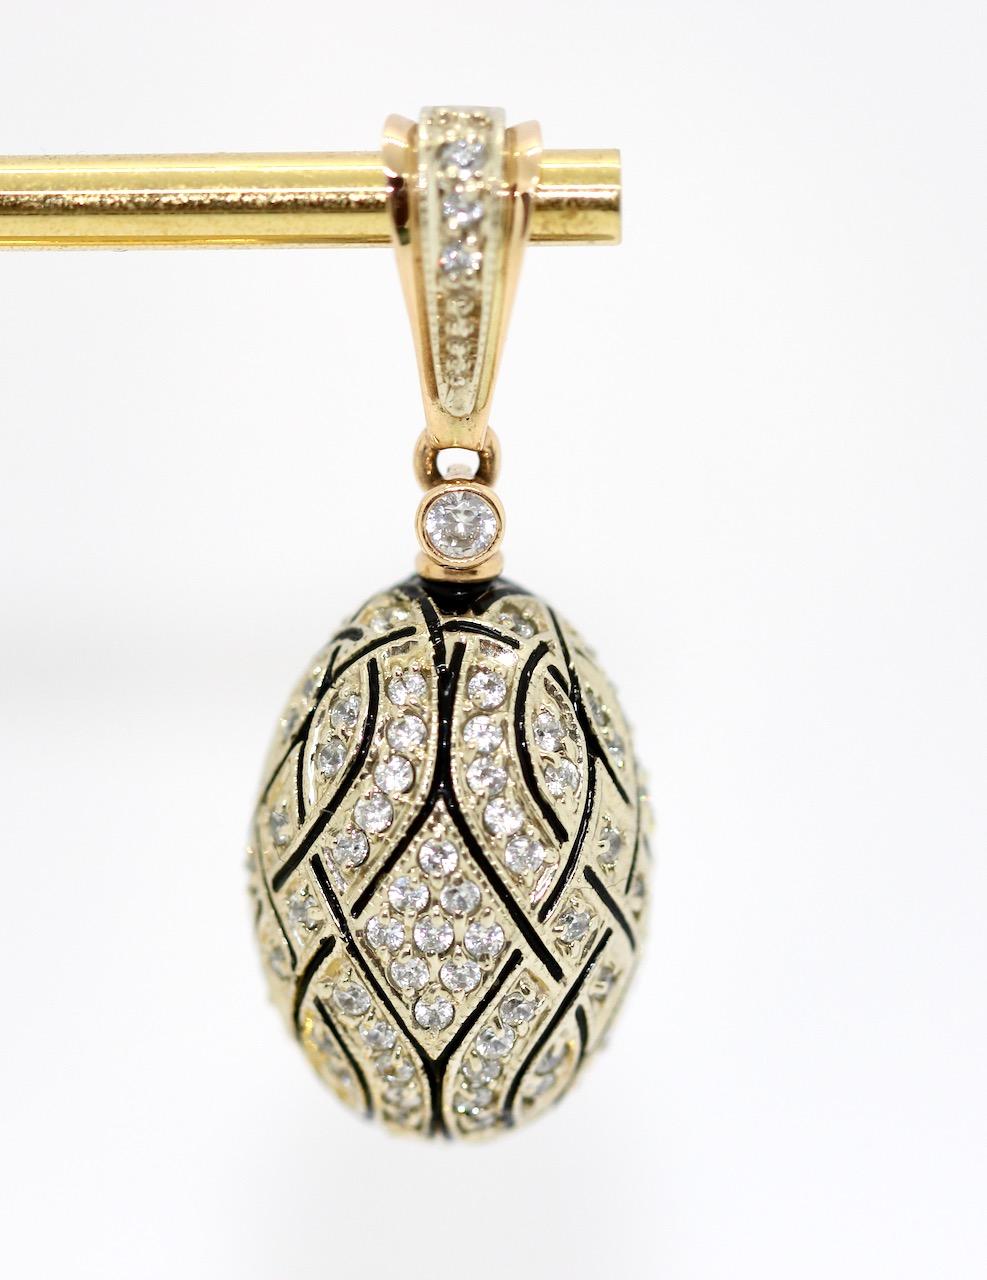 Charming diamond and enamel Pendant, Enhancer in 14k rose gold with the design of the Faberge eggs.

We also offer the matching Earrings and ring.

Includes certificate of authenticity.